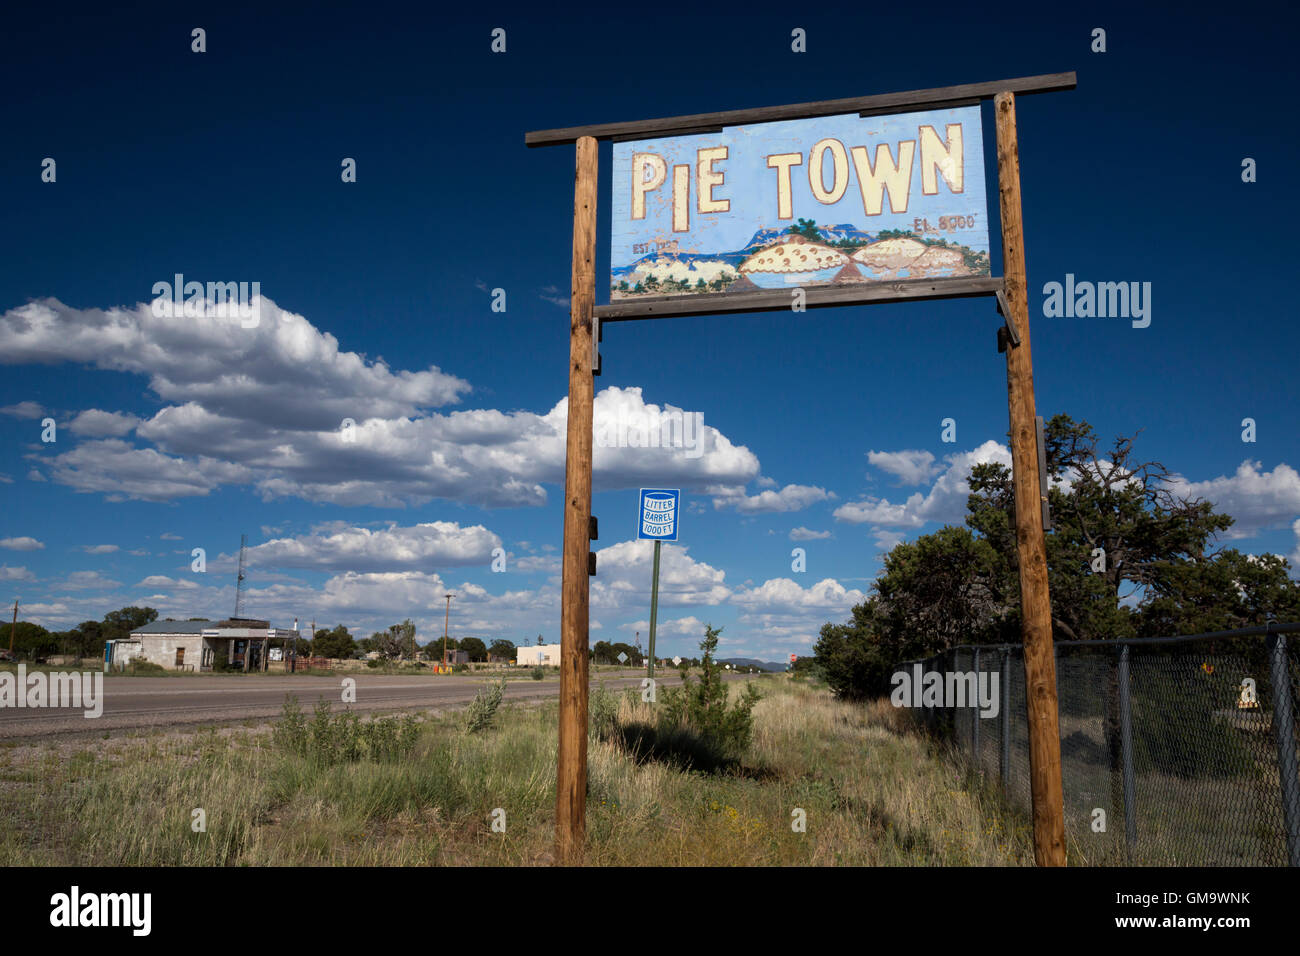 Pie Town, New Mexico - A small town famous for its pies. Stock Photo